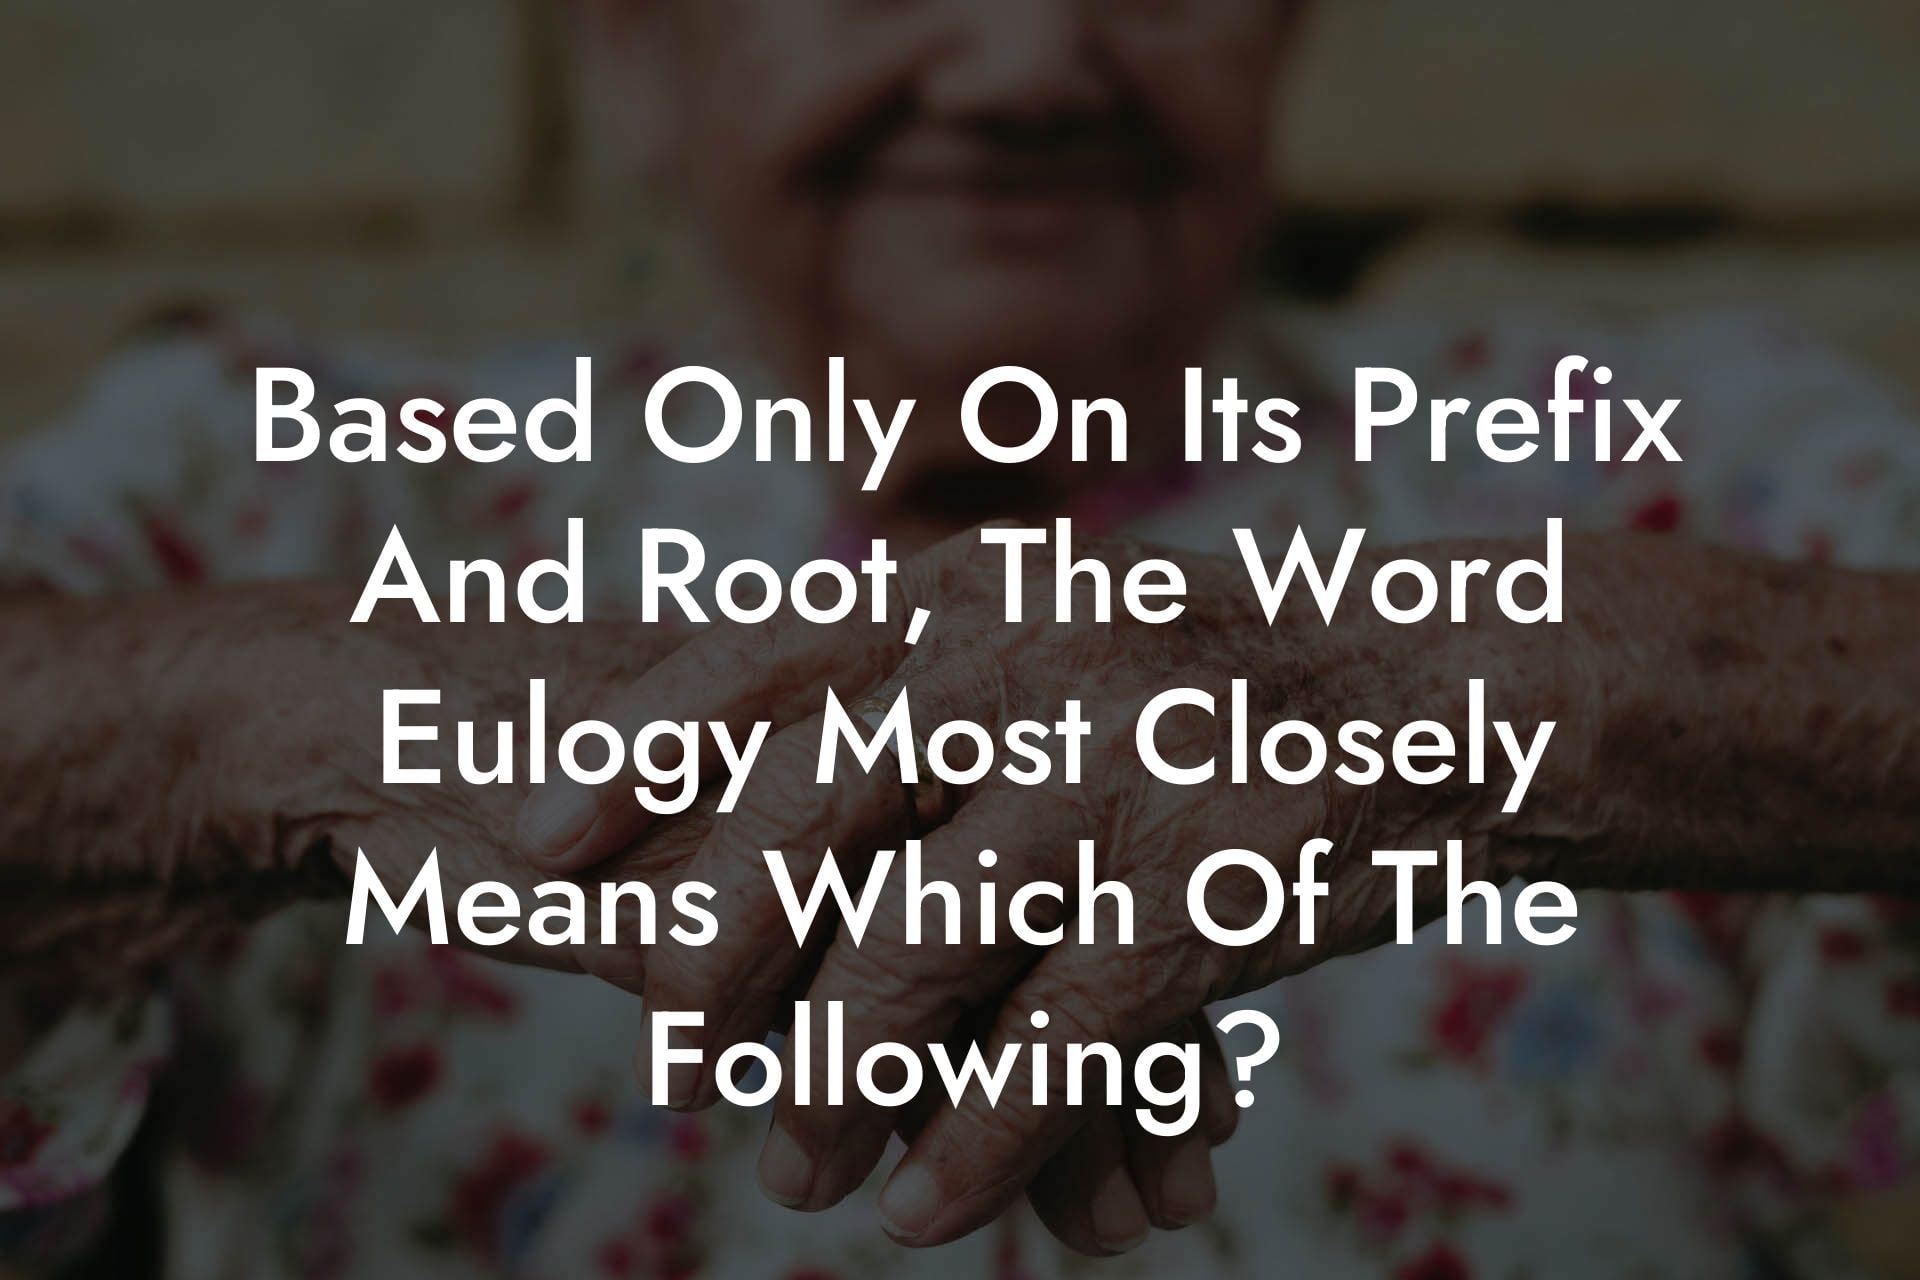 Based Only On Its Prefix And Root, The Word Eulogy Most Closely Means Which Of The Following